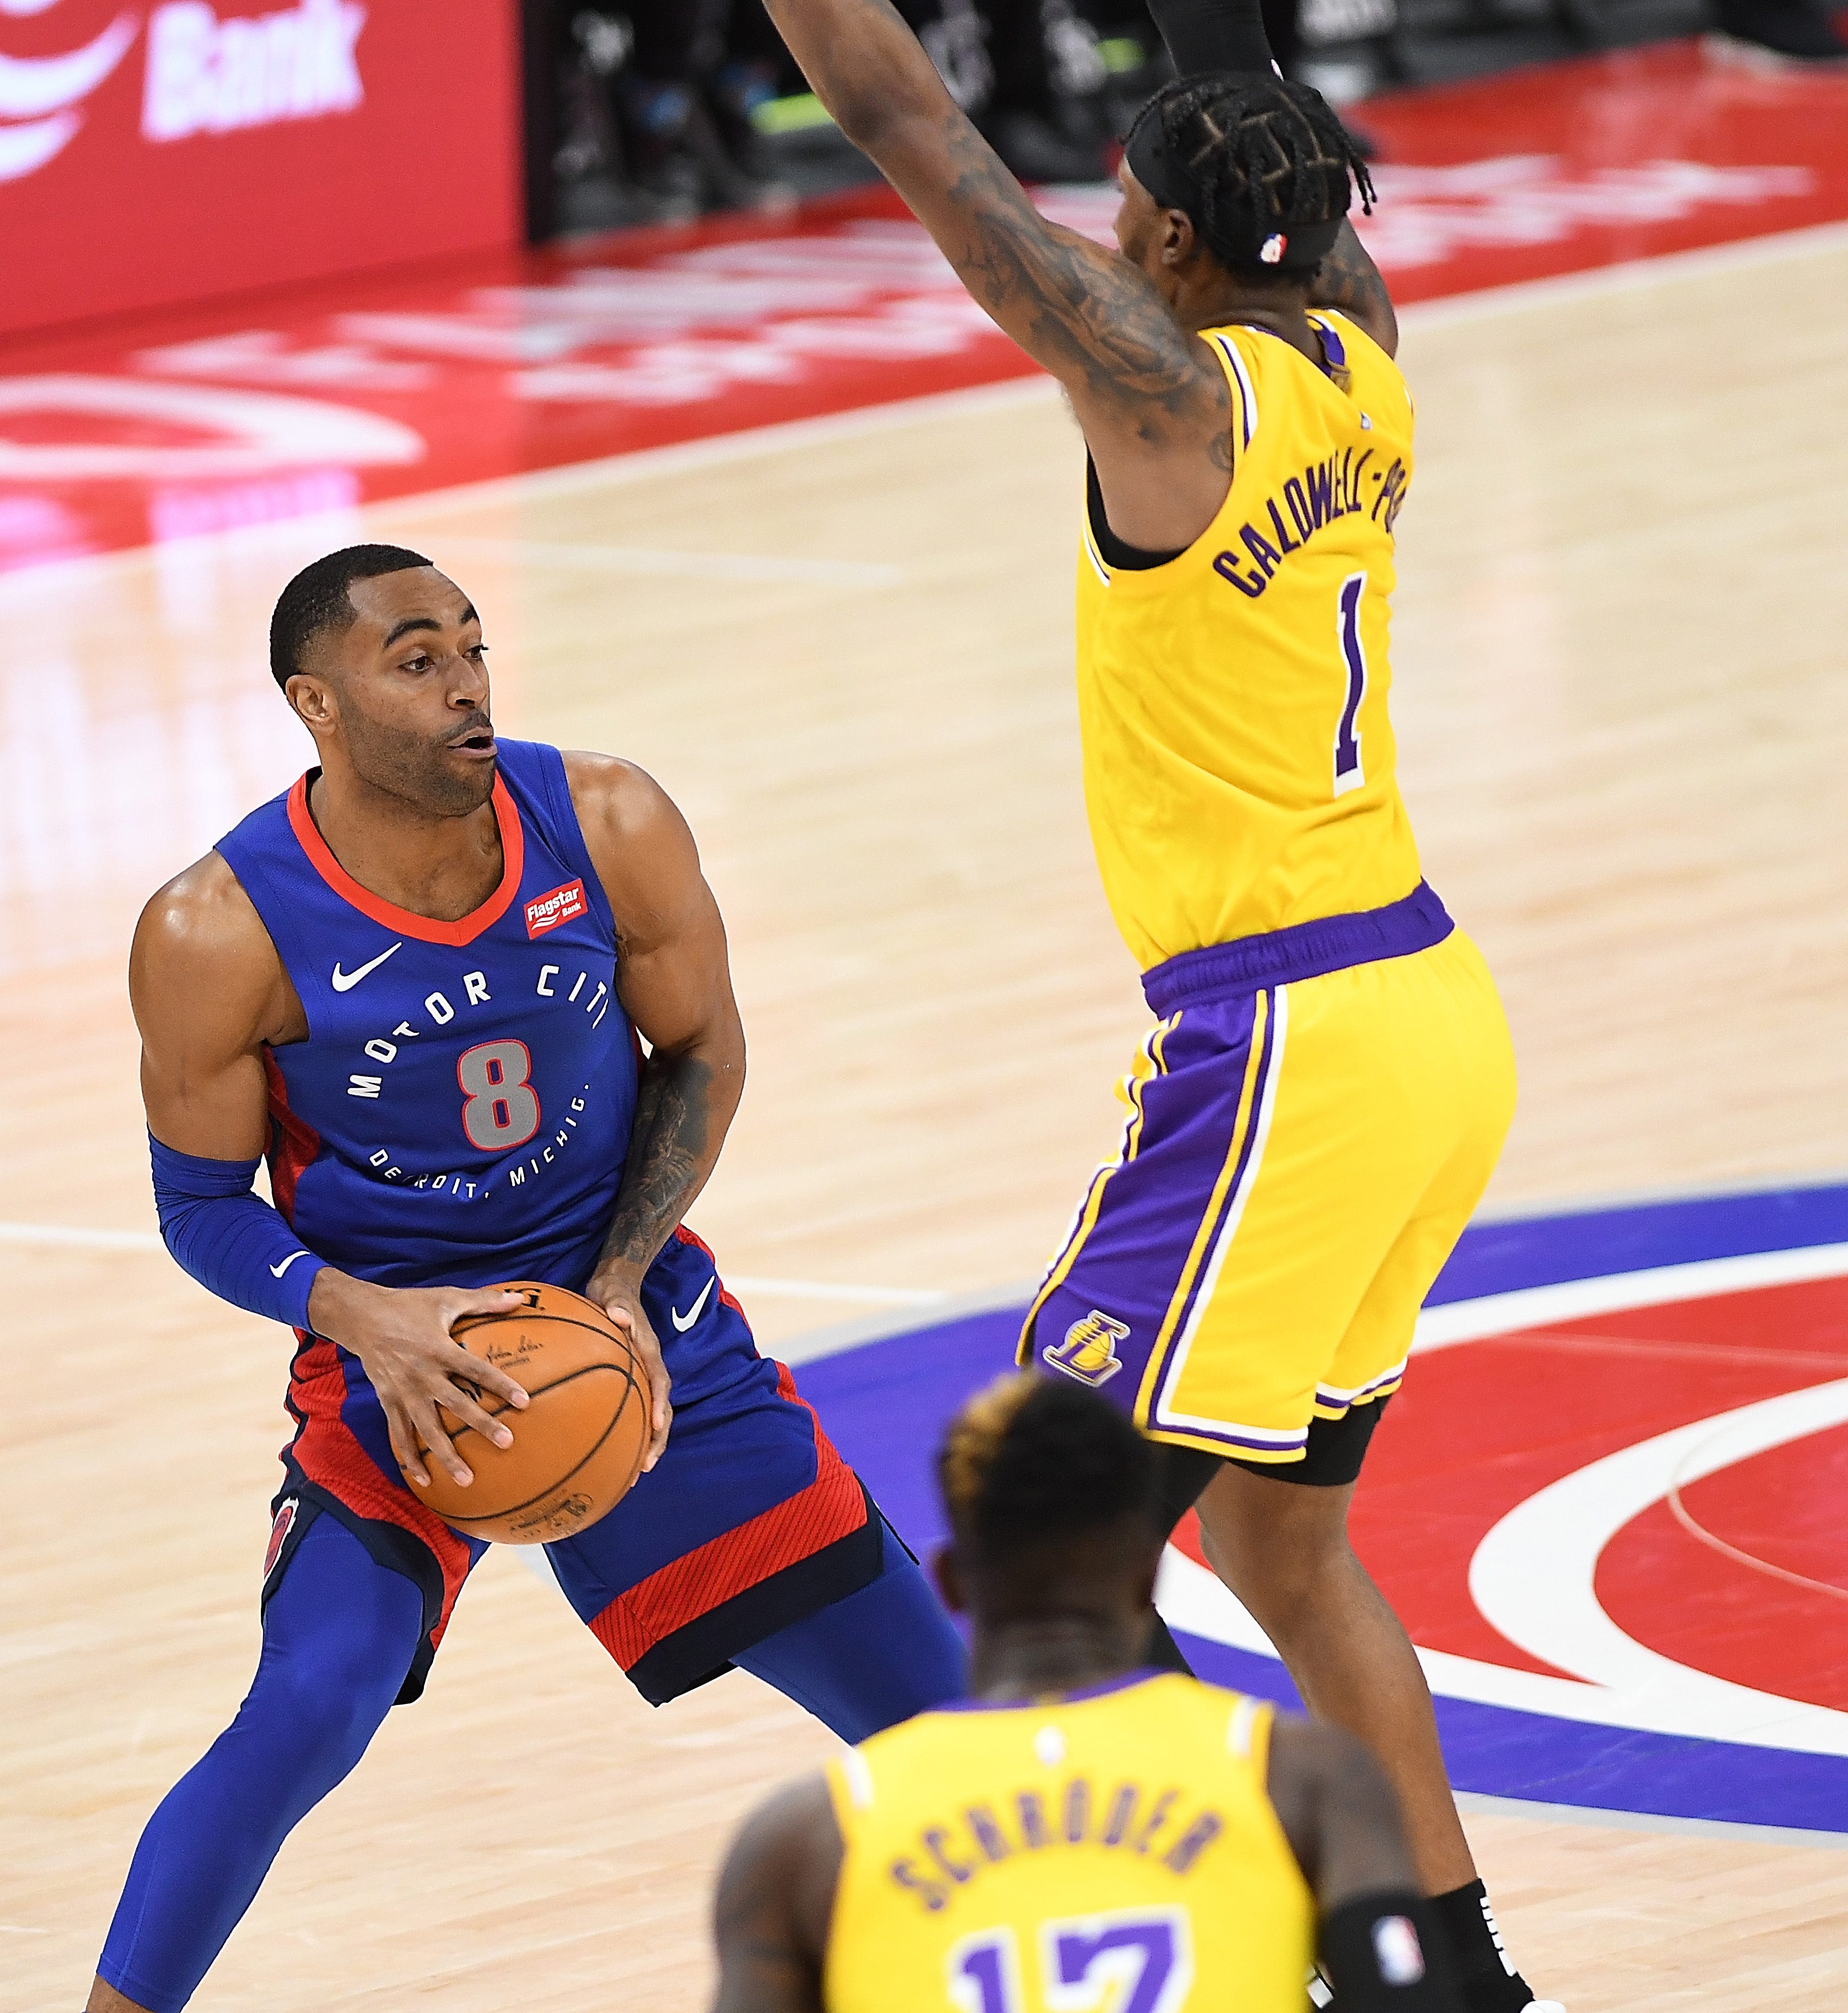 Pistons' Wayne Ellington looks for room around Lakers' Kentavious Caldwell-Pope in the second quarter.